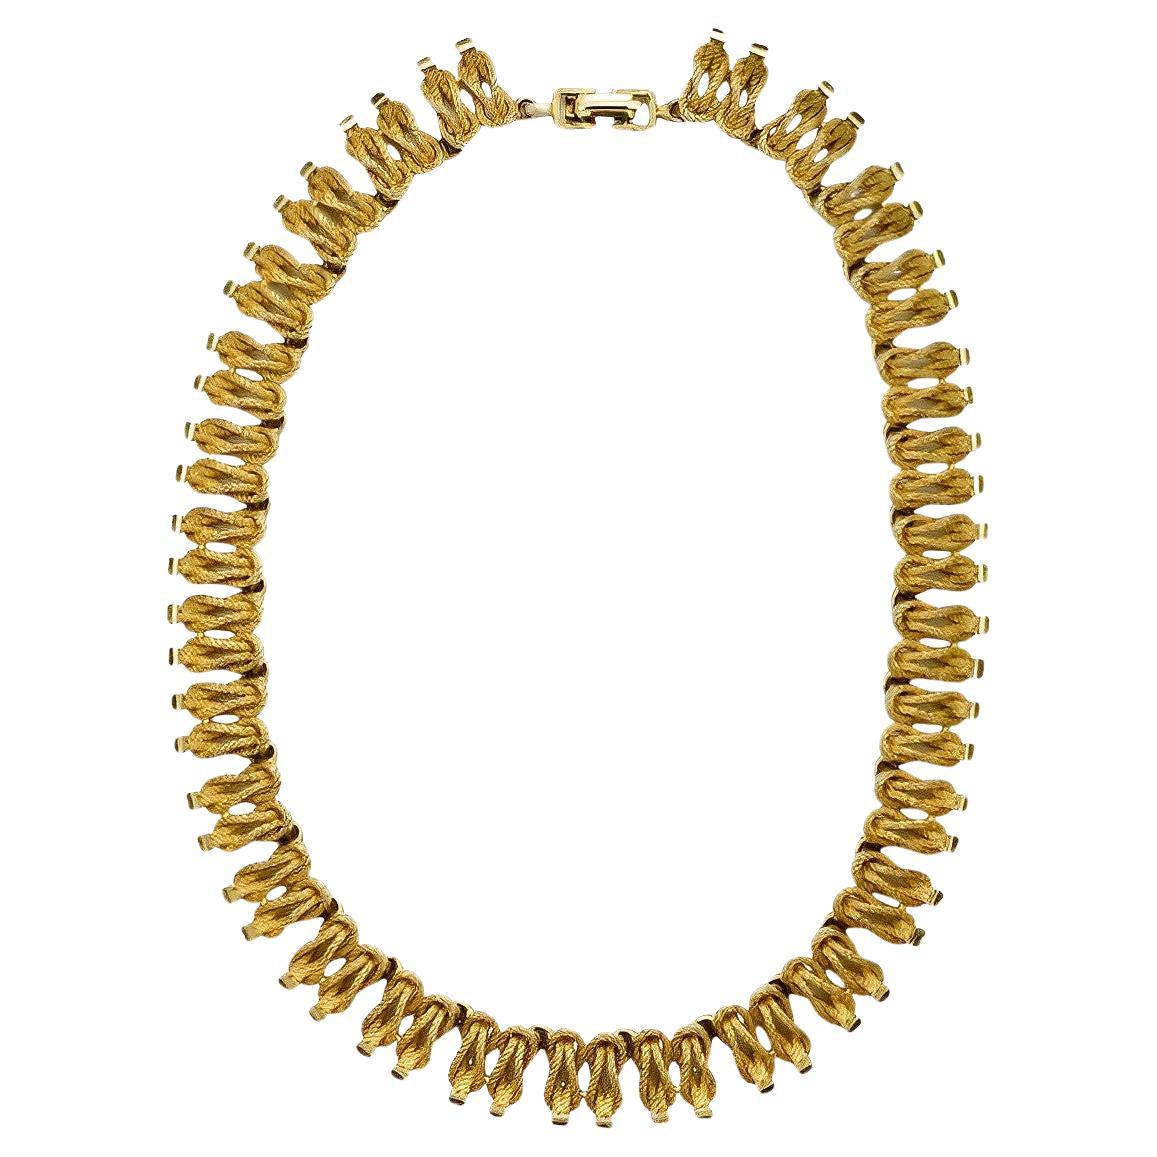 Gold Plated Textured Knot Design Link Necklace circa 1950s